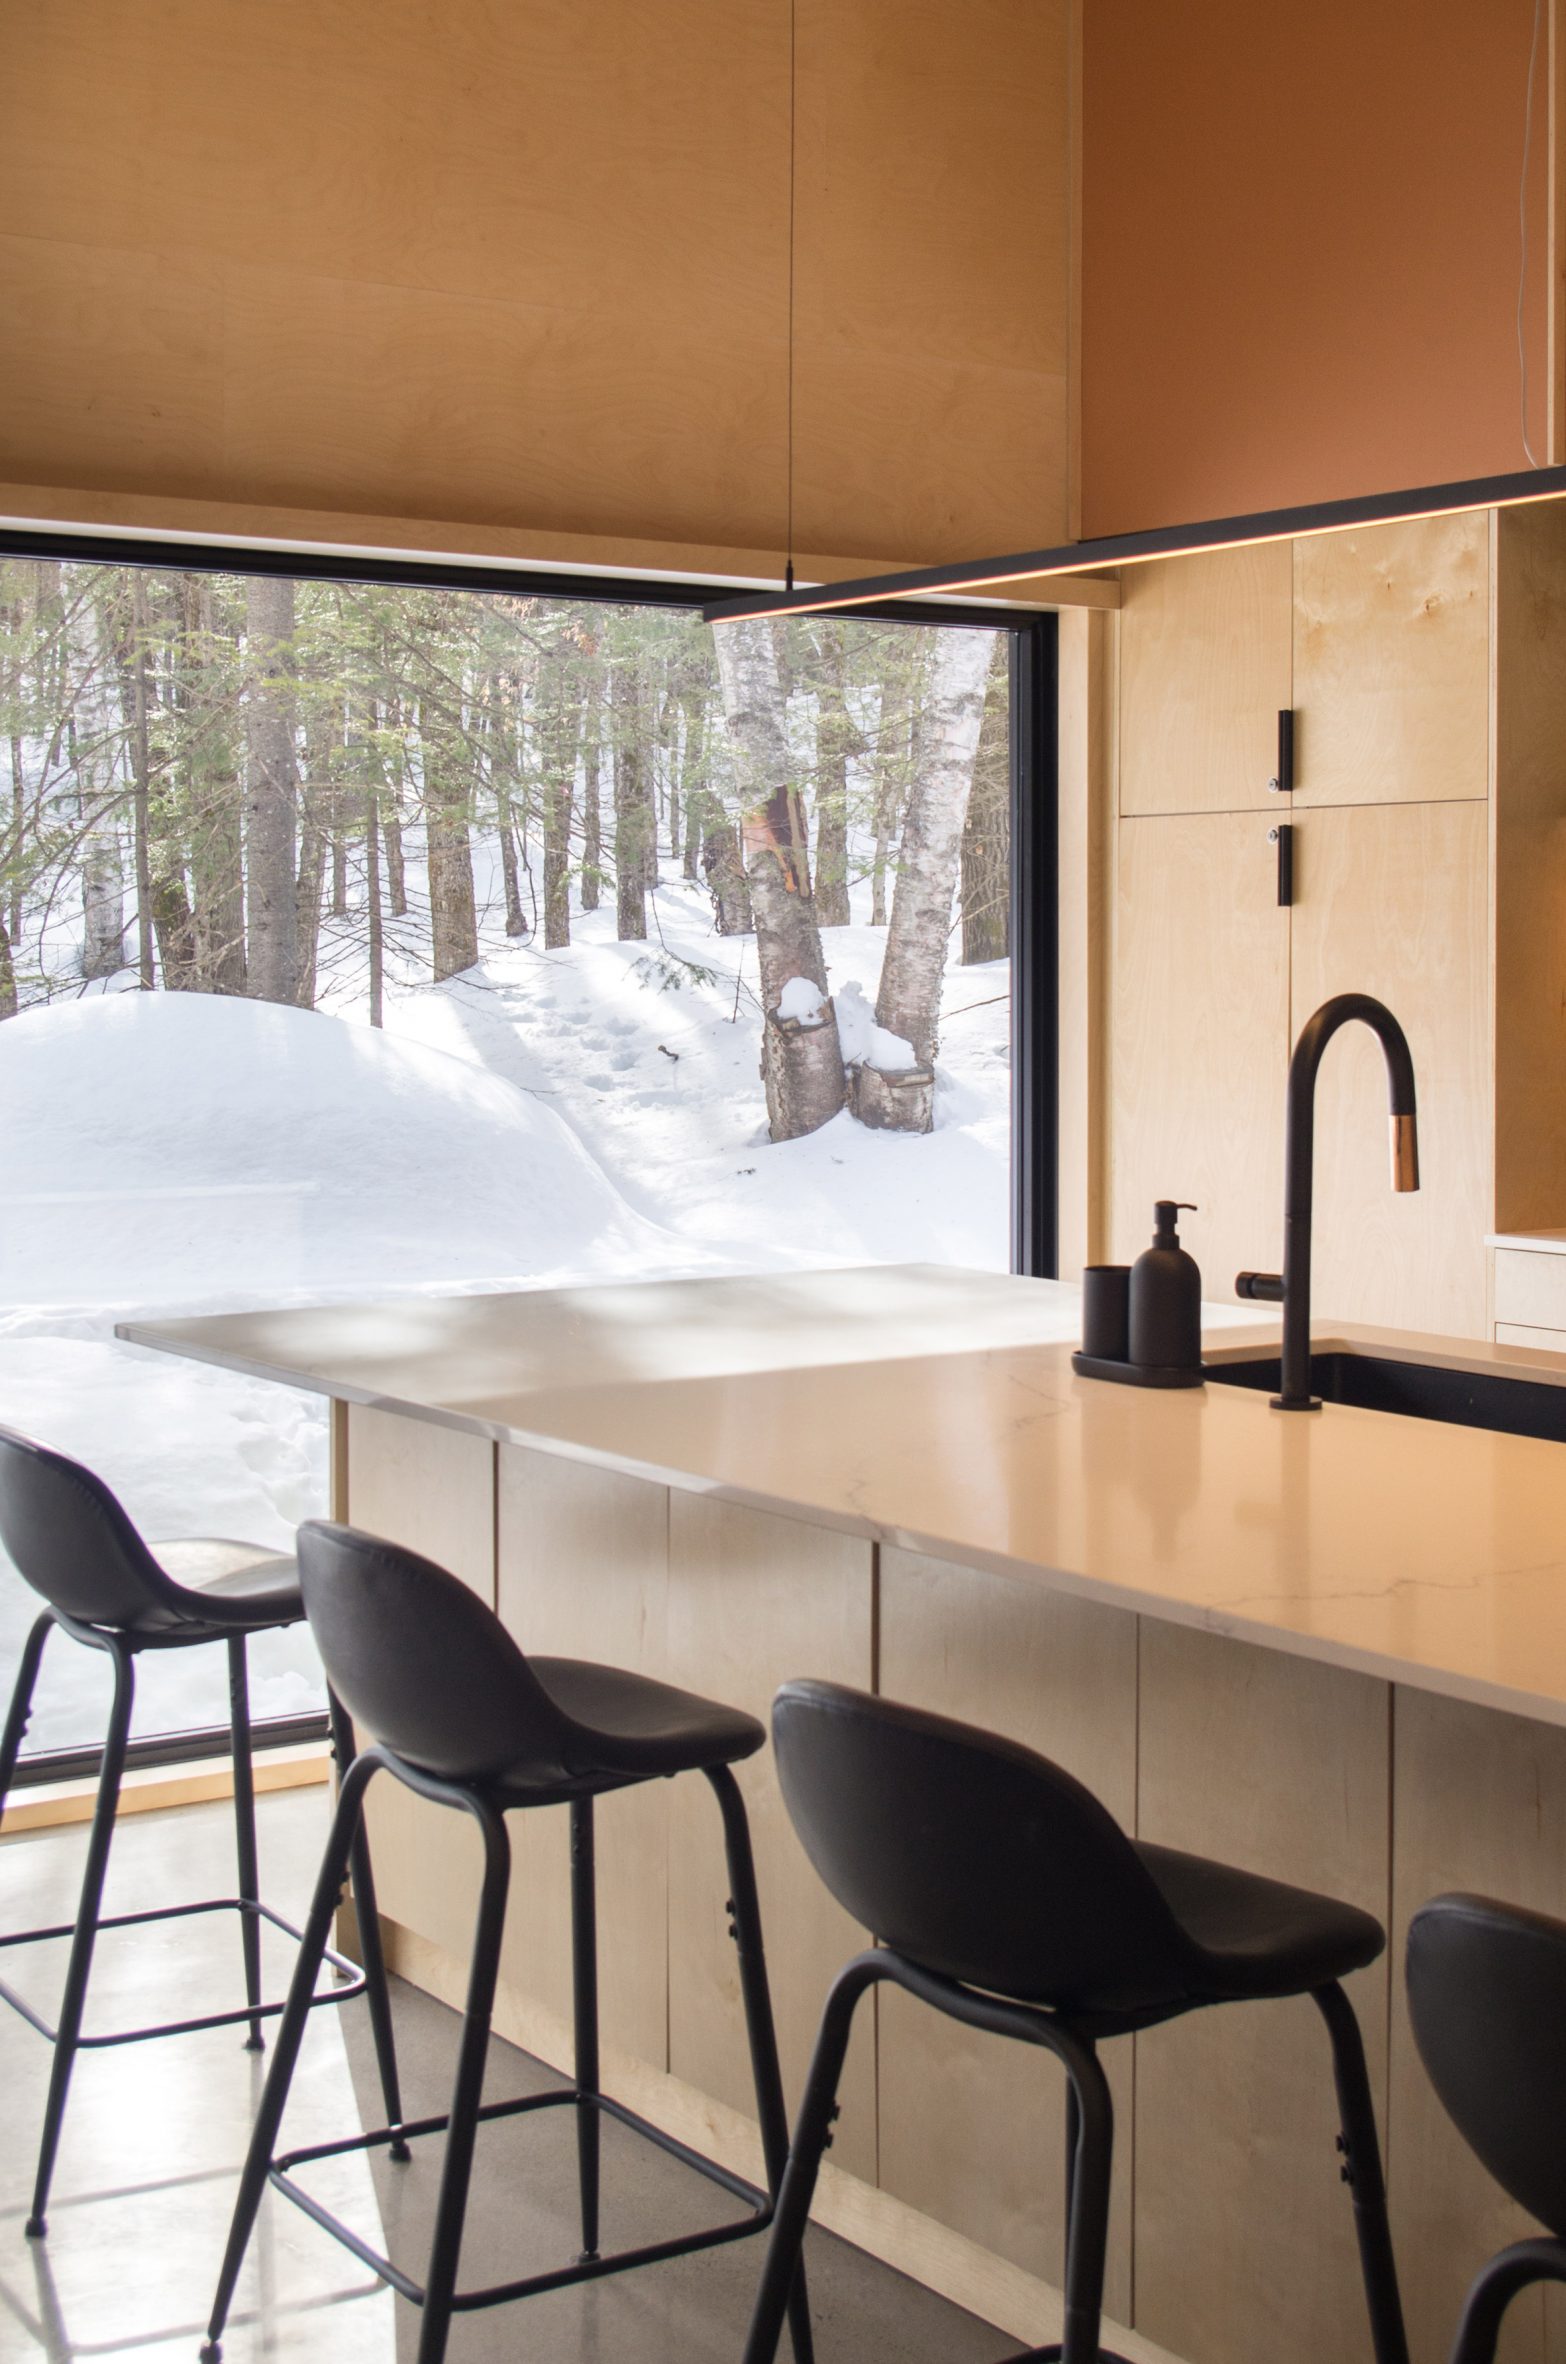 Glass windows with views of snow in the kitchen